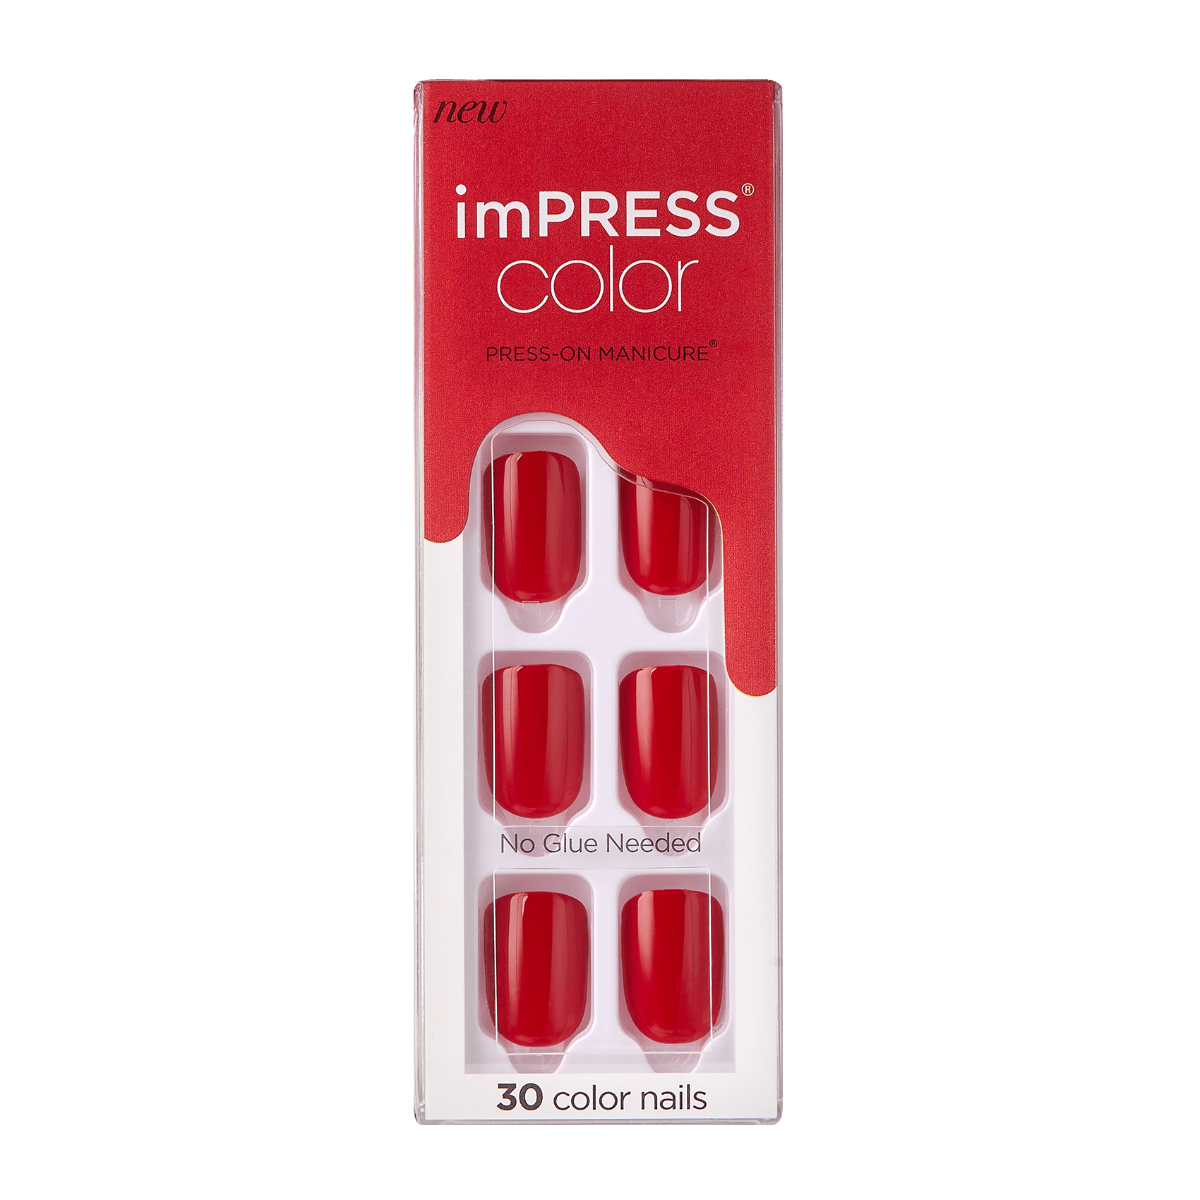 KISS ImPRESS Color Press-On Manicure - Reddy or Not - Taille S